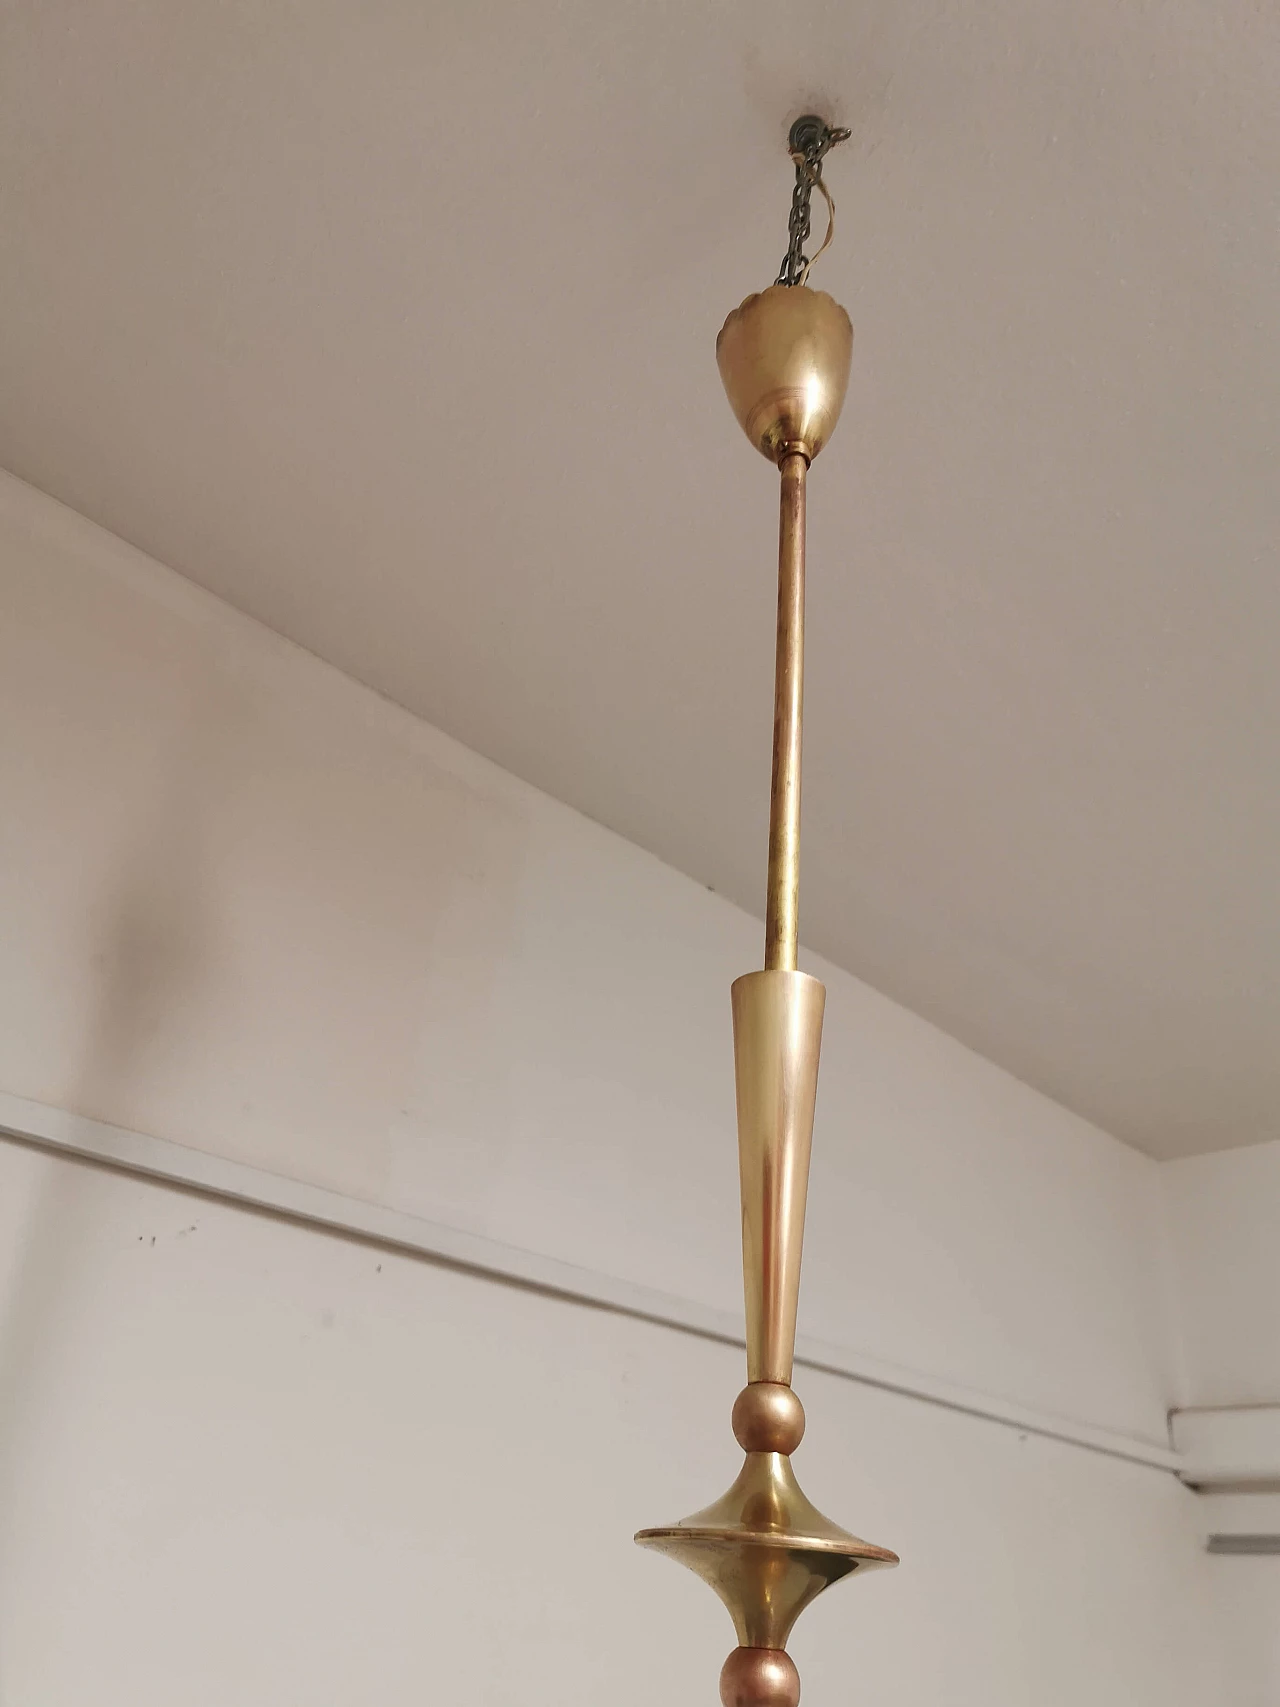 Suspension lamp by Pietro Chiesa for Fontana Arte, 1940s 1372273